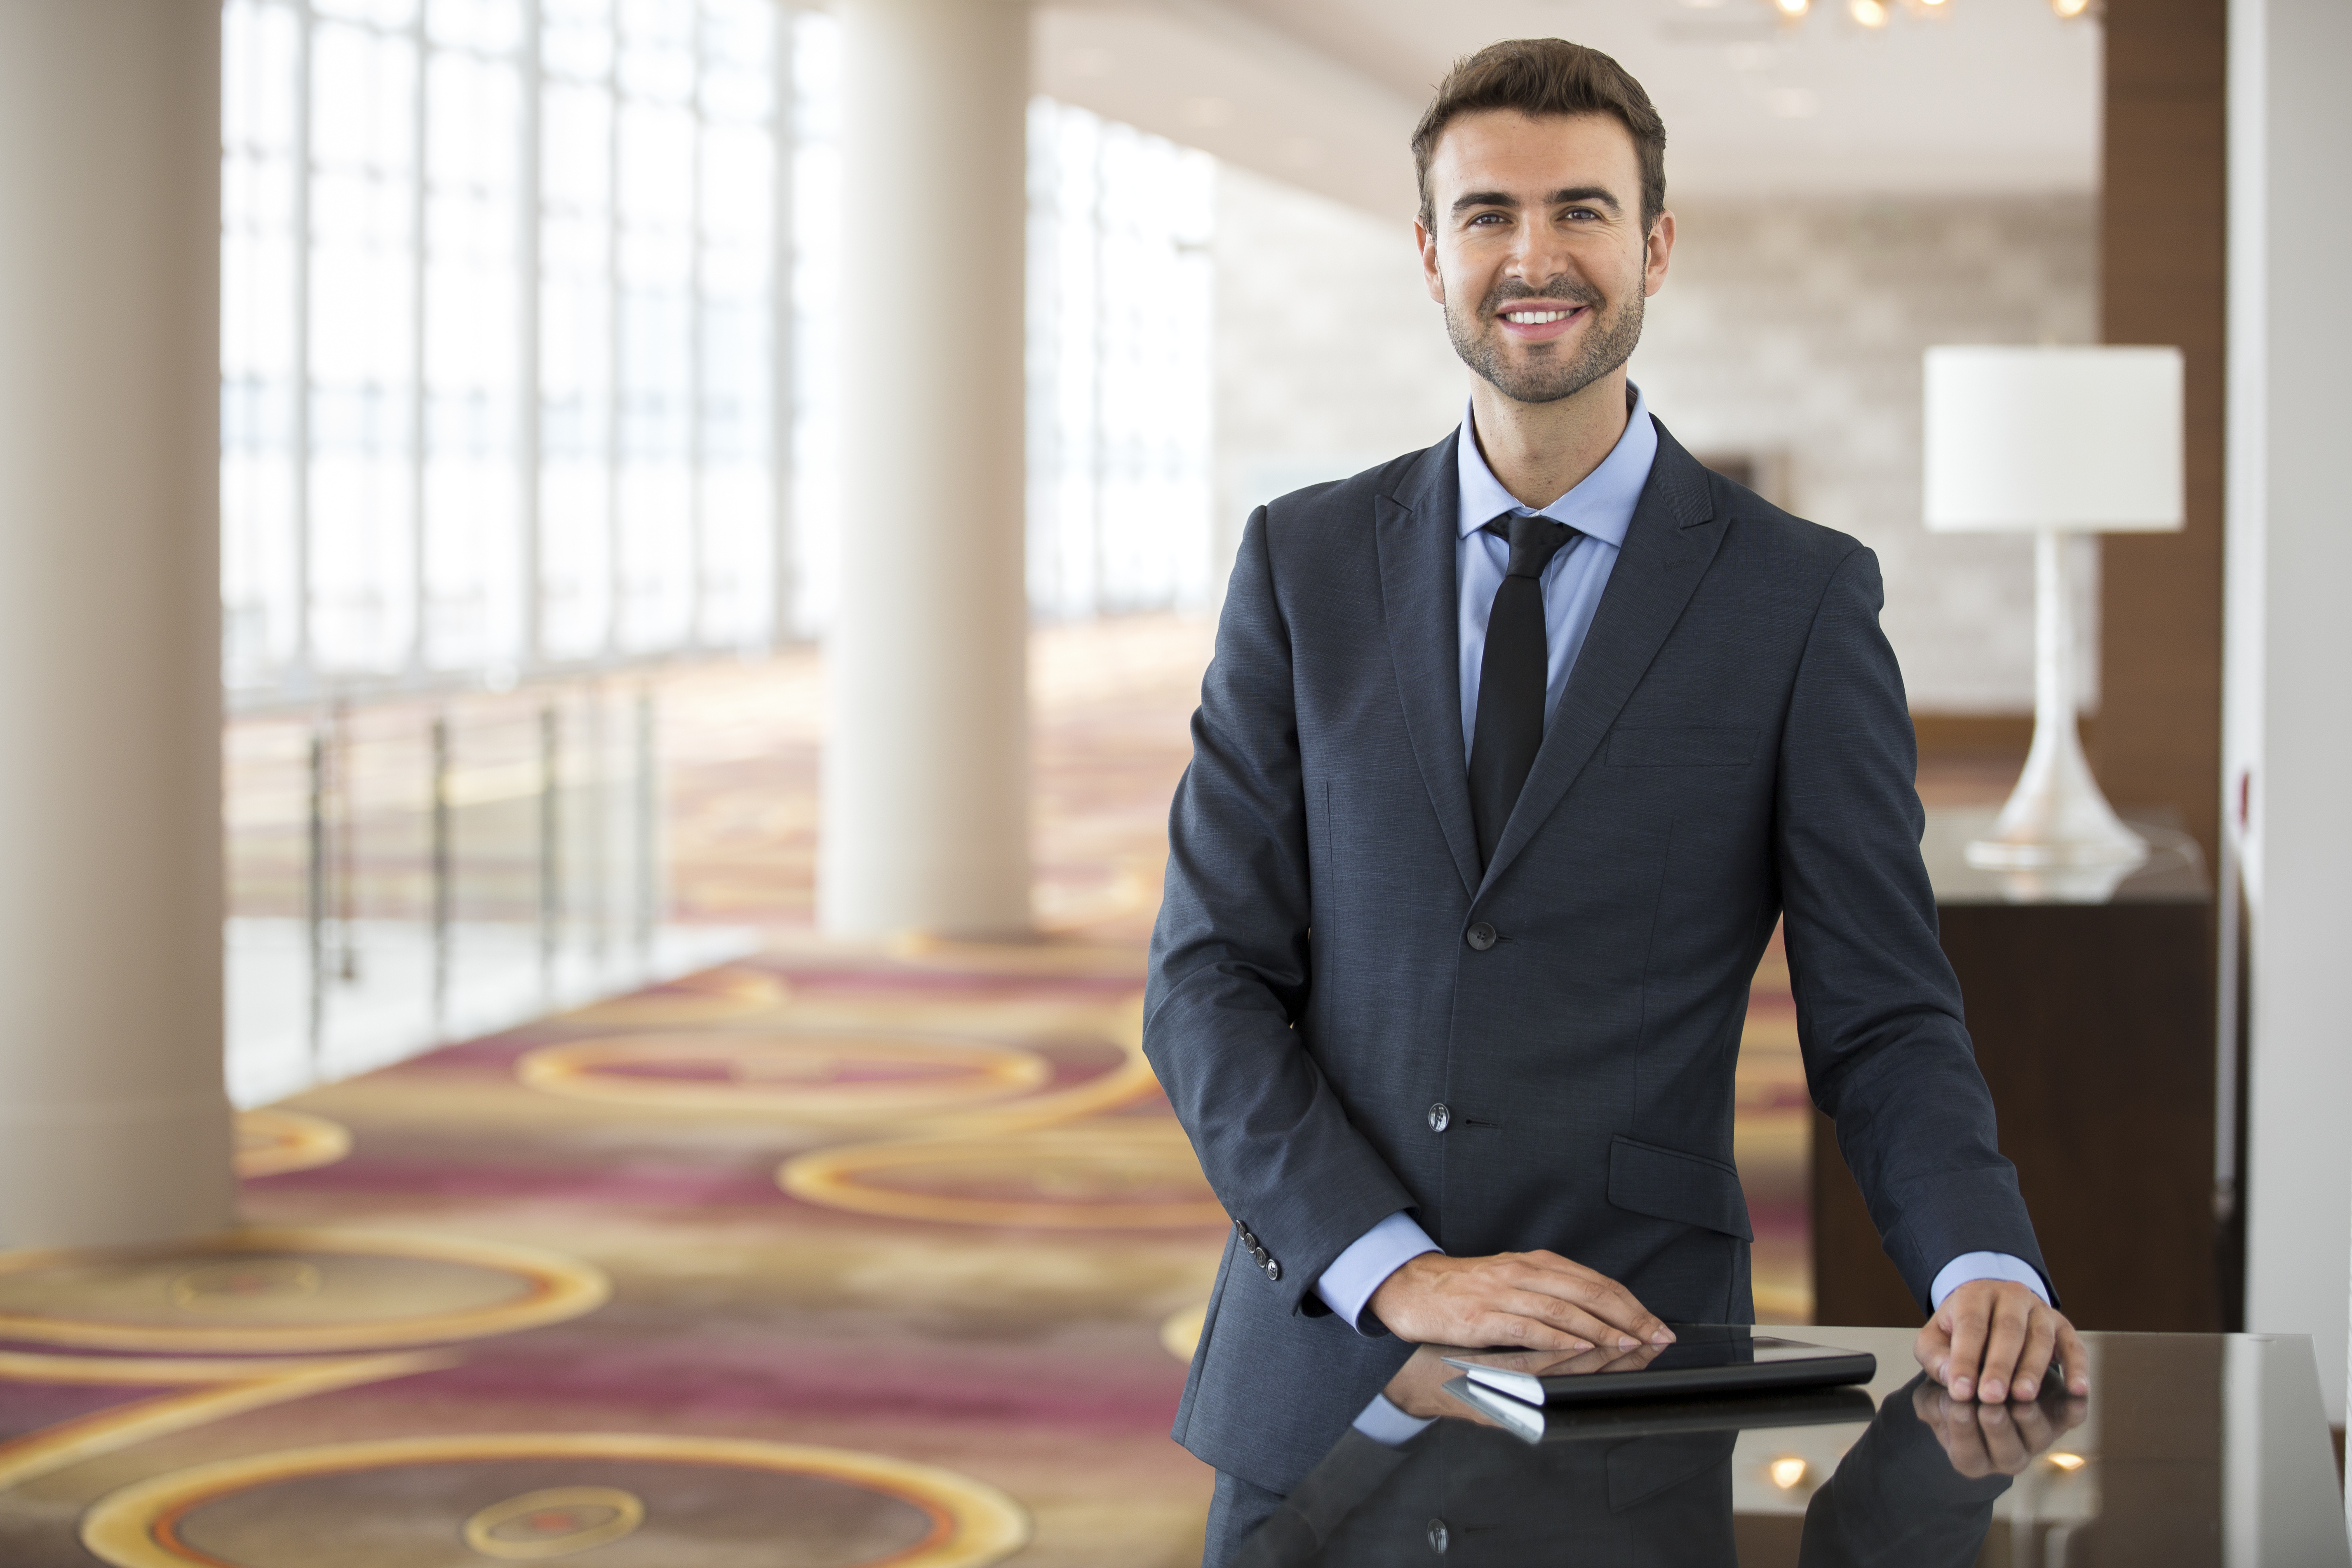 Hotel manager staring at the camera in a hotel lobby. | Source: Shutterstock